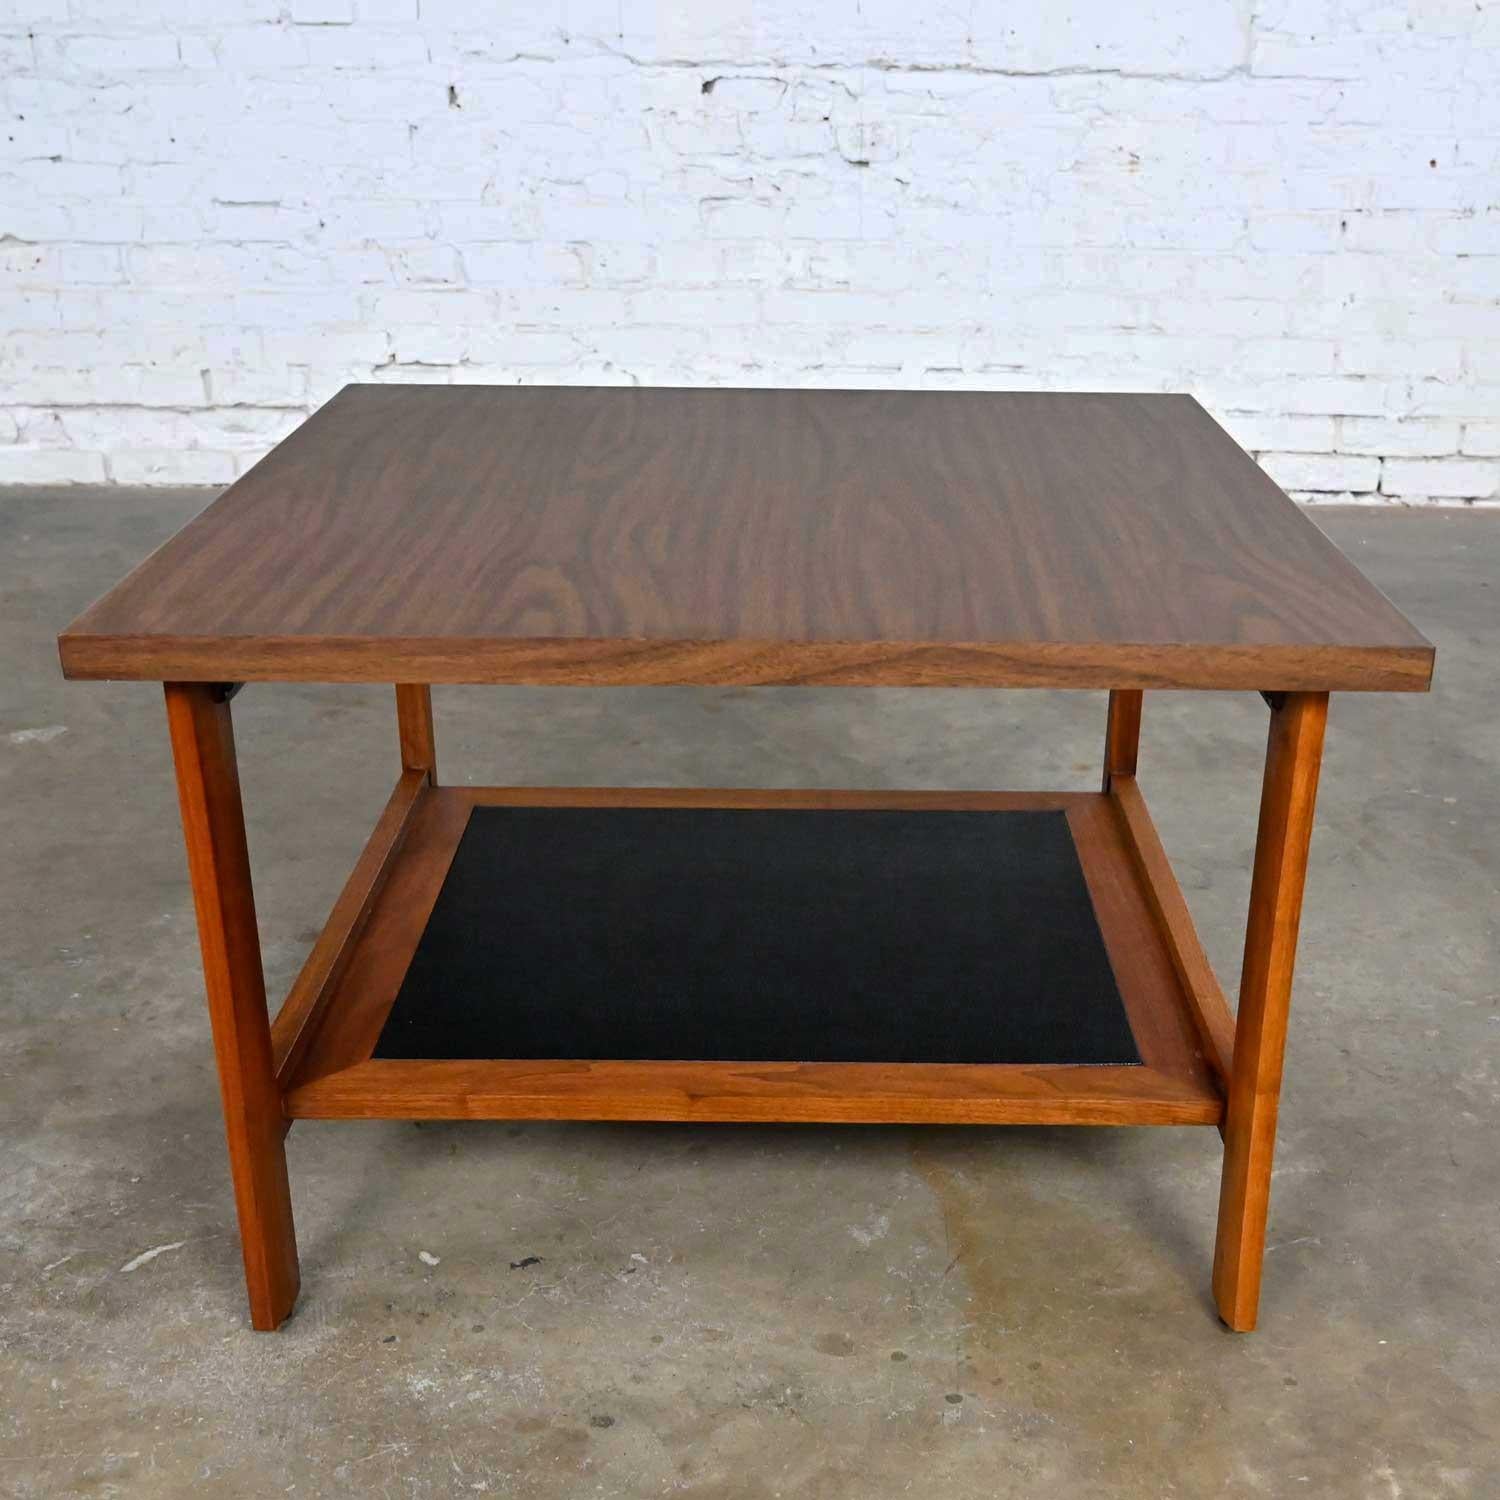 Wonderful Mid-Century Modern square walnut end table lower shelf with a black laminate insert, and laminate top. Beautiful condition, keeping in mind that this is vintage and not new so will have signs of use and wear. Please see photos and zoom in